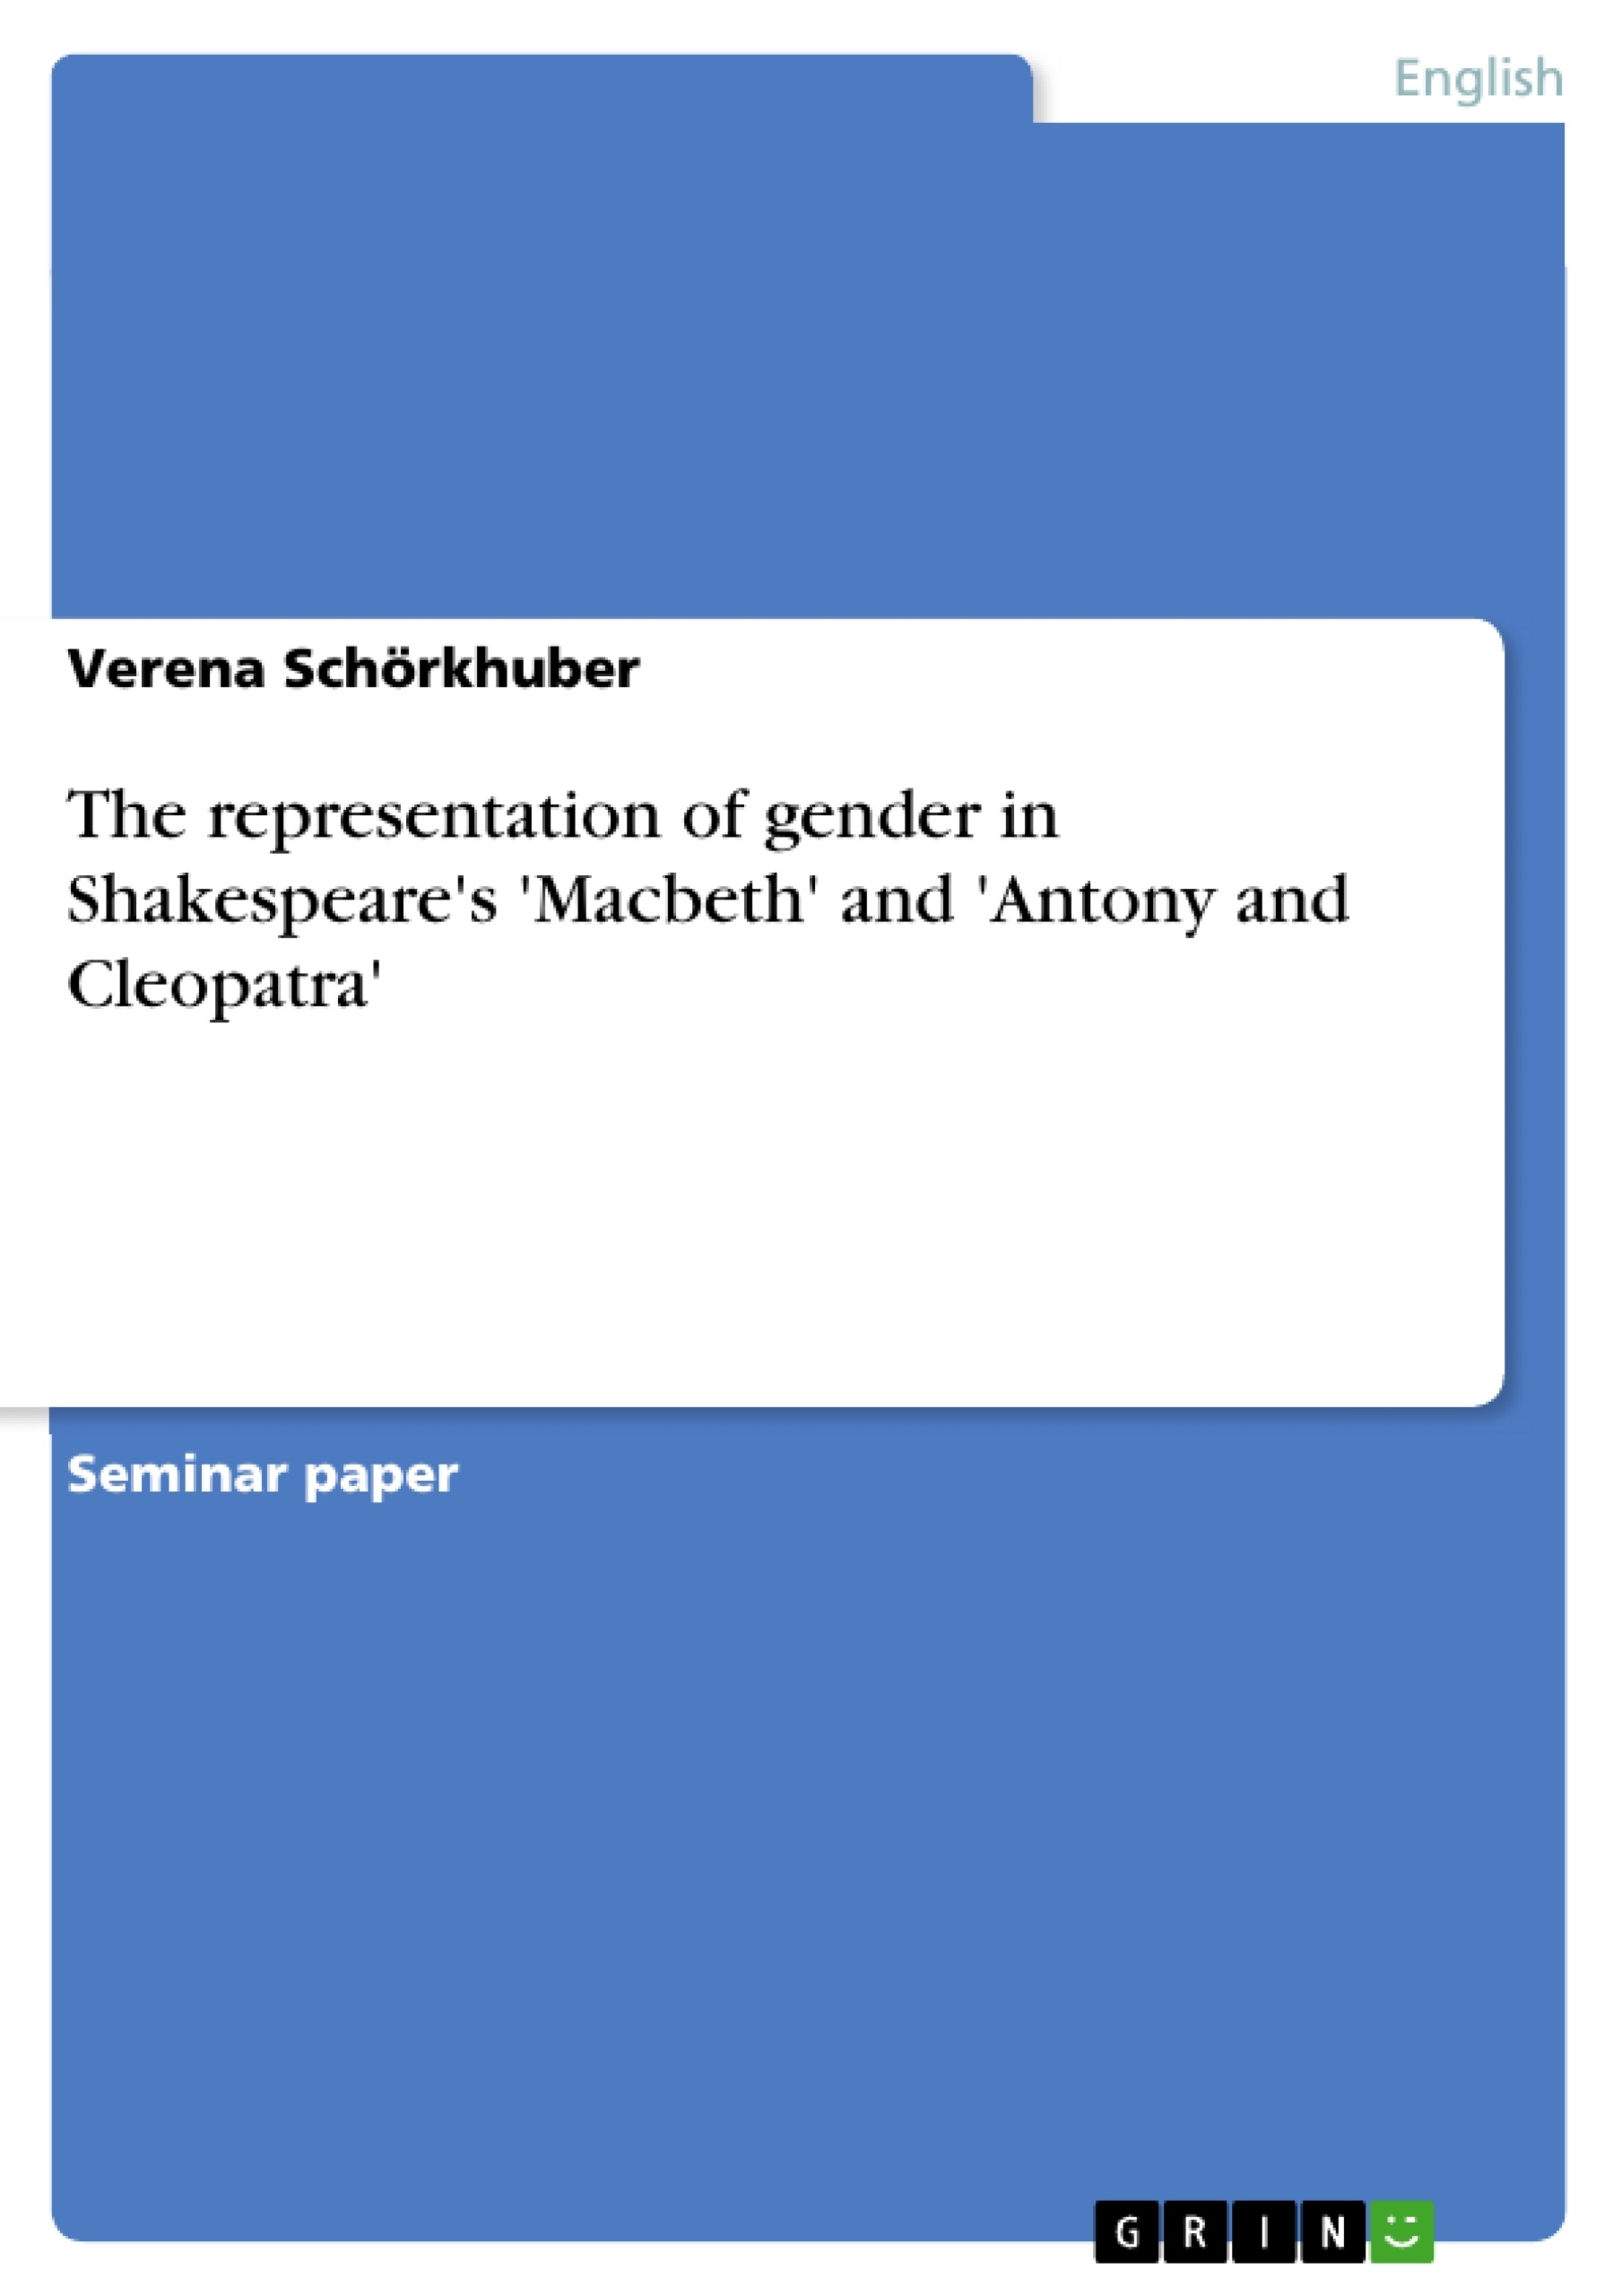 Title: The representation of gender in Shakespeare's 'Macbeth' and 'Antony and Cleopatra'